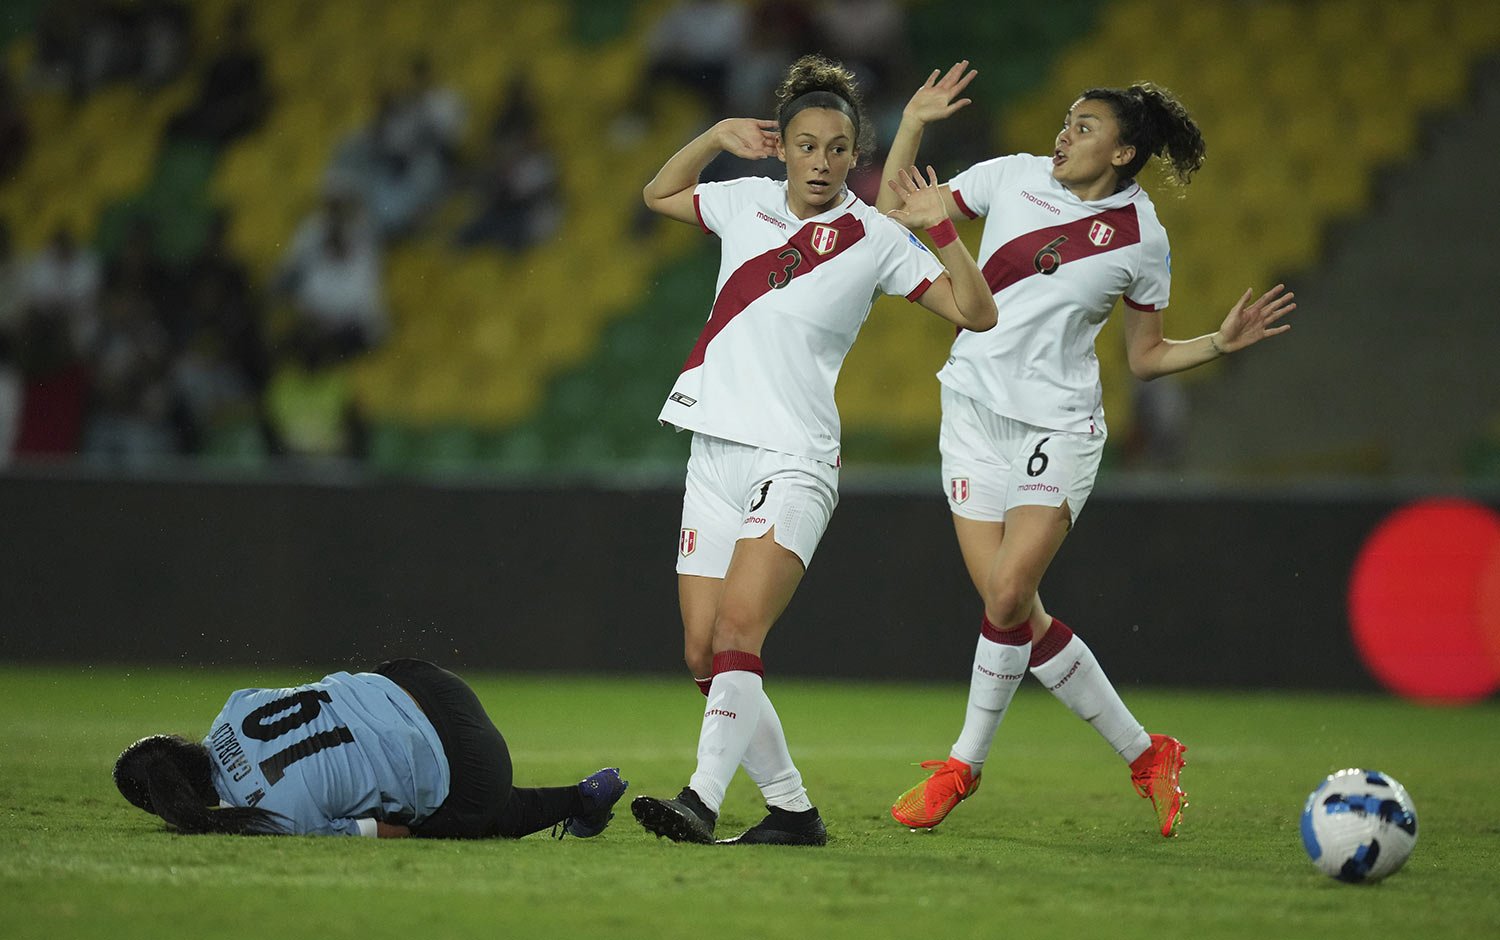  Peru's Grace Canigna, center, and her teammate Claudia Canigna react as Uruguay's Wendy Carballo lies on the field after a foul during a Women's Copa America soccer match in Armenia, Colombia, Monday, July 18, 2022. (AP Photo/Dolores Ochoa) 